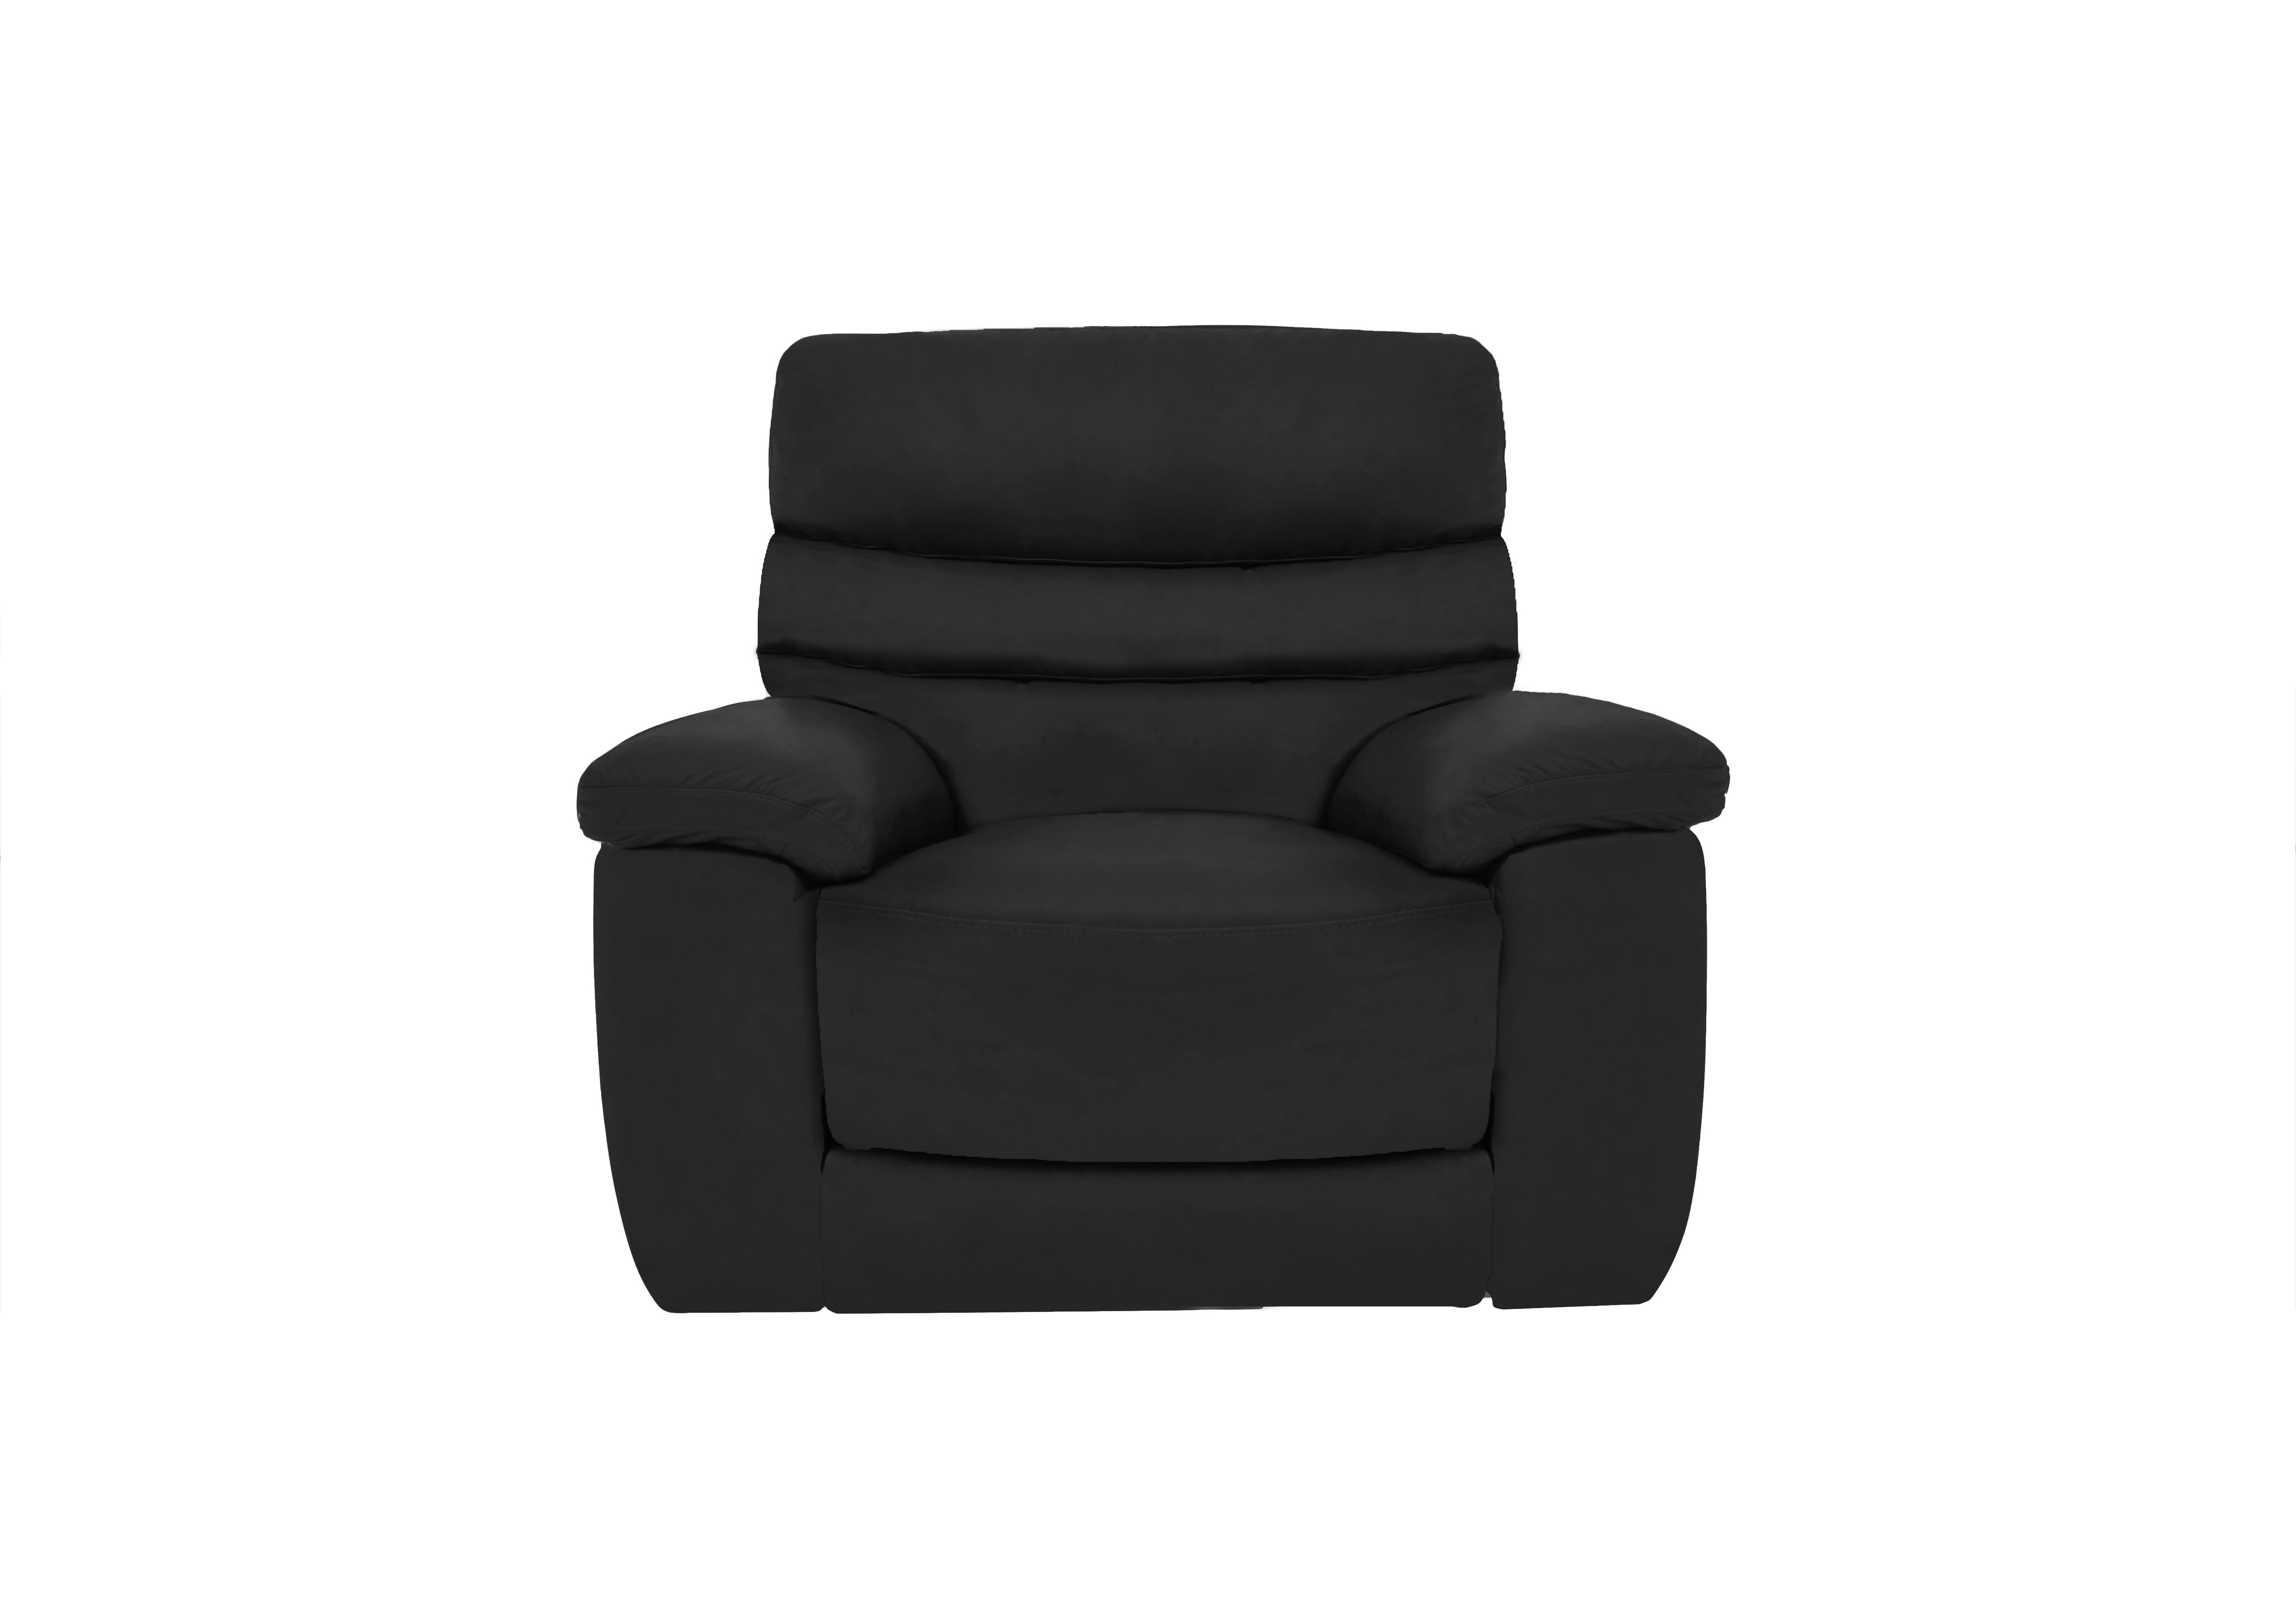 Nimbus Leather Chair in Bx-023c Black on Furniture Village